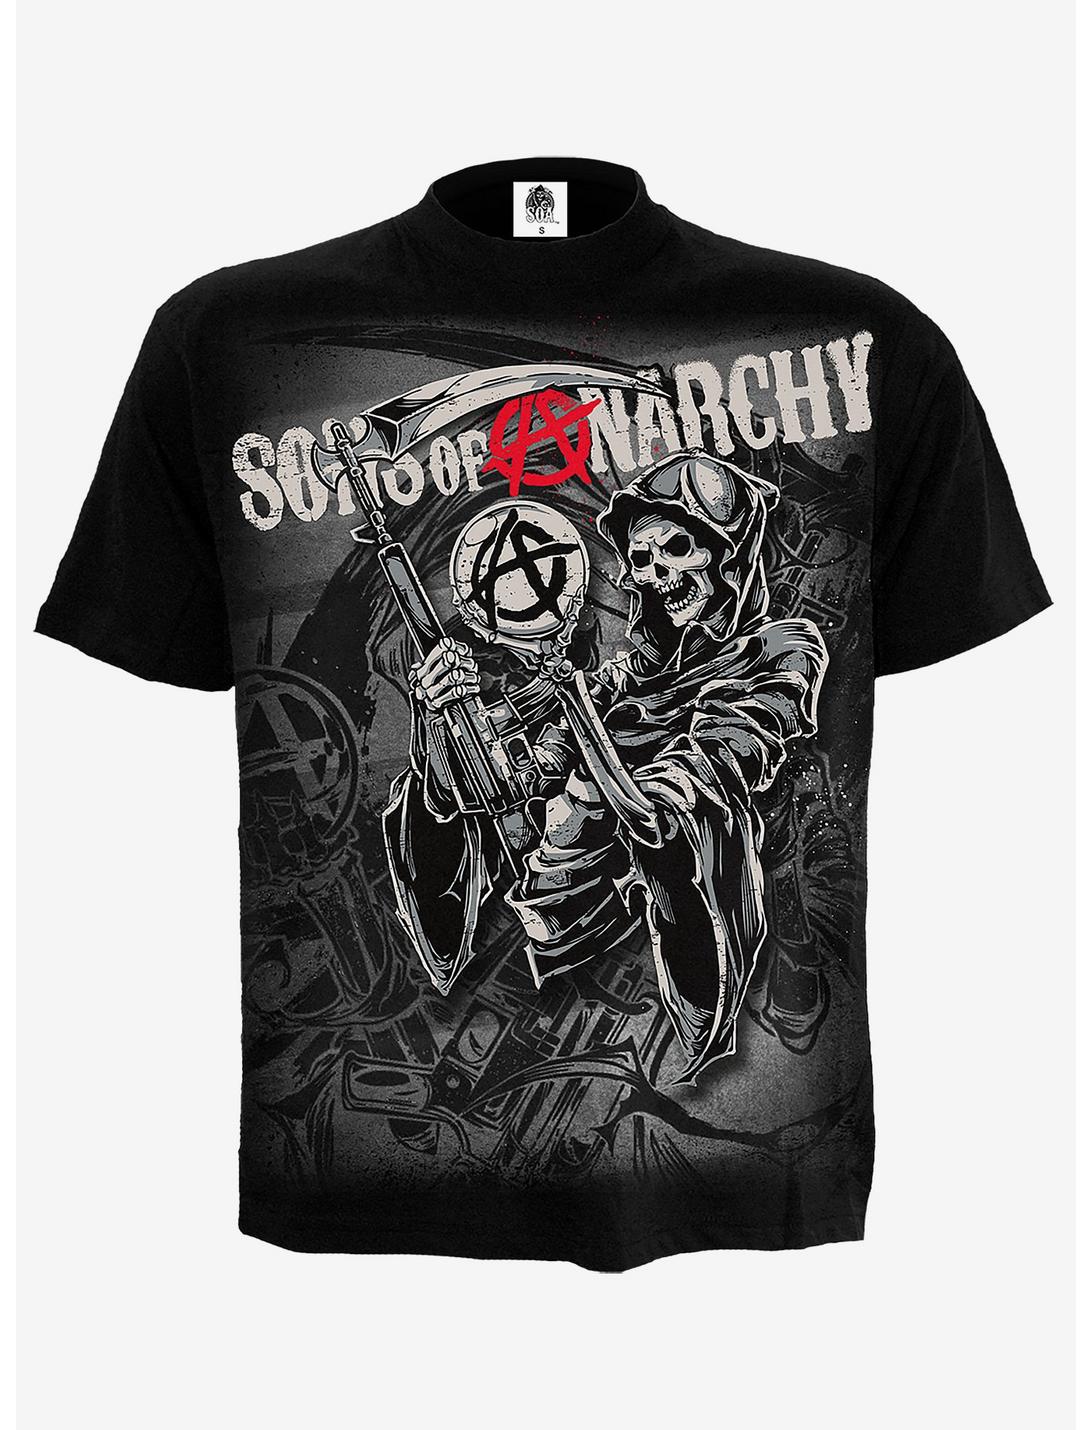 Sons Of Anarchy Reaper Montage T-Shirt, BLACK, hi-res